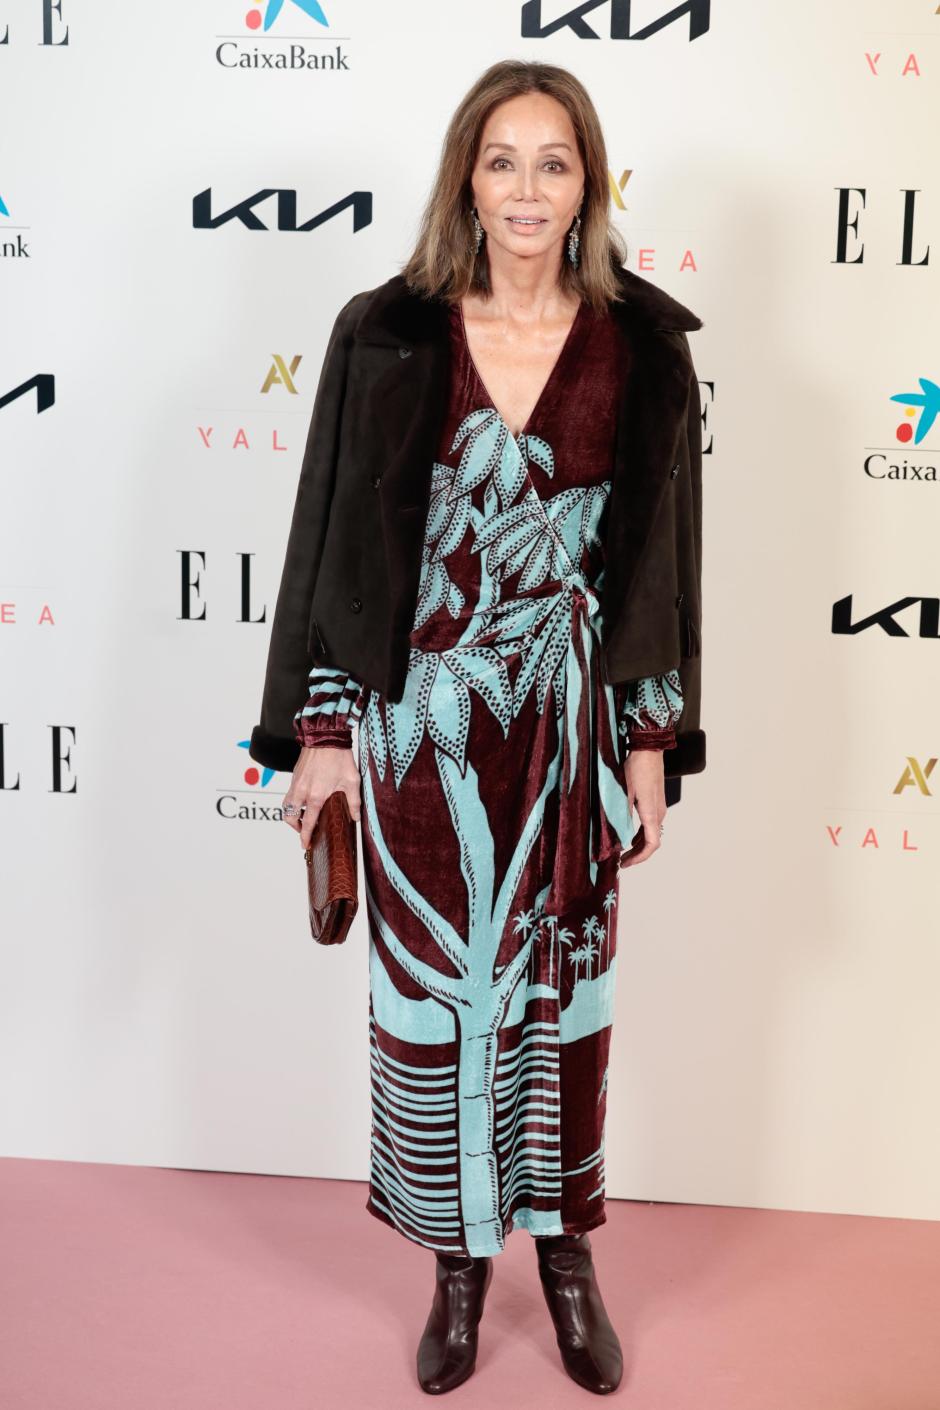 Isabel Preysler at photocall for Elle Women Summit event in Madrid on Tuesday, 7 March 2023.